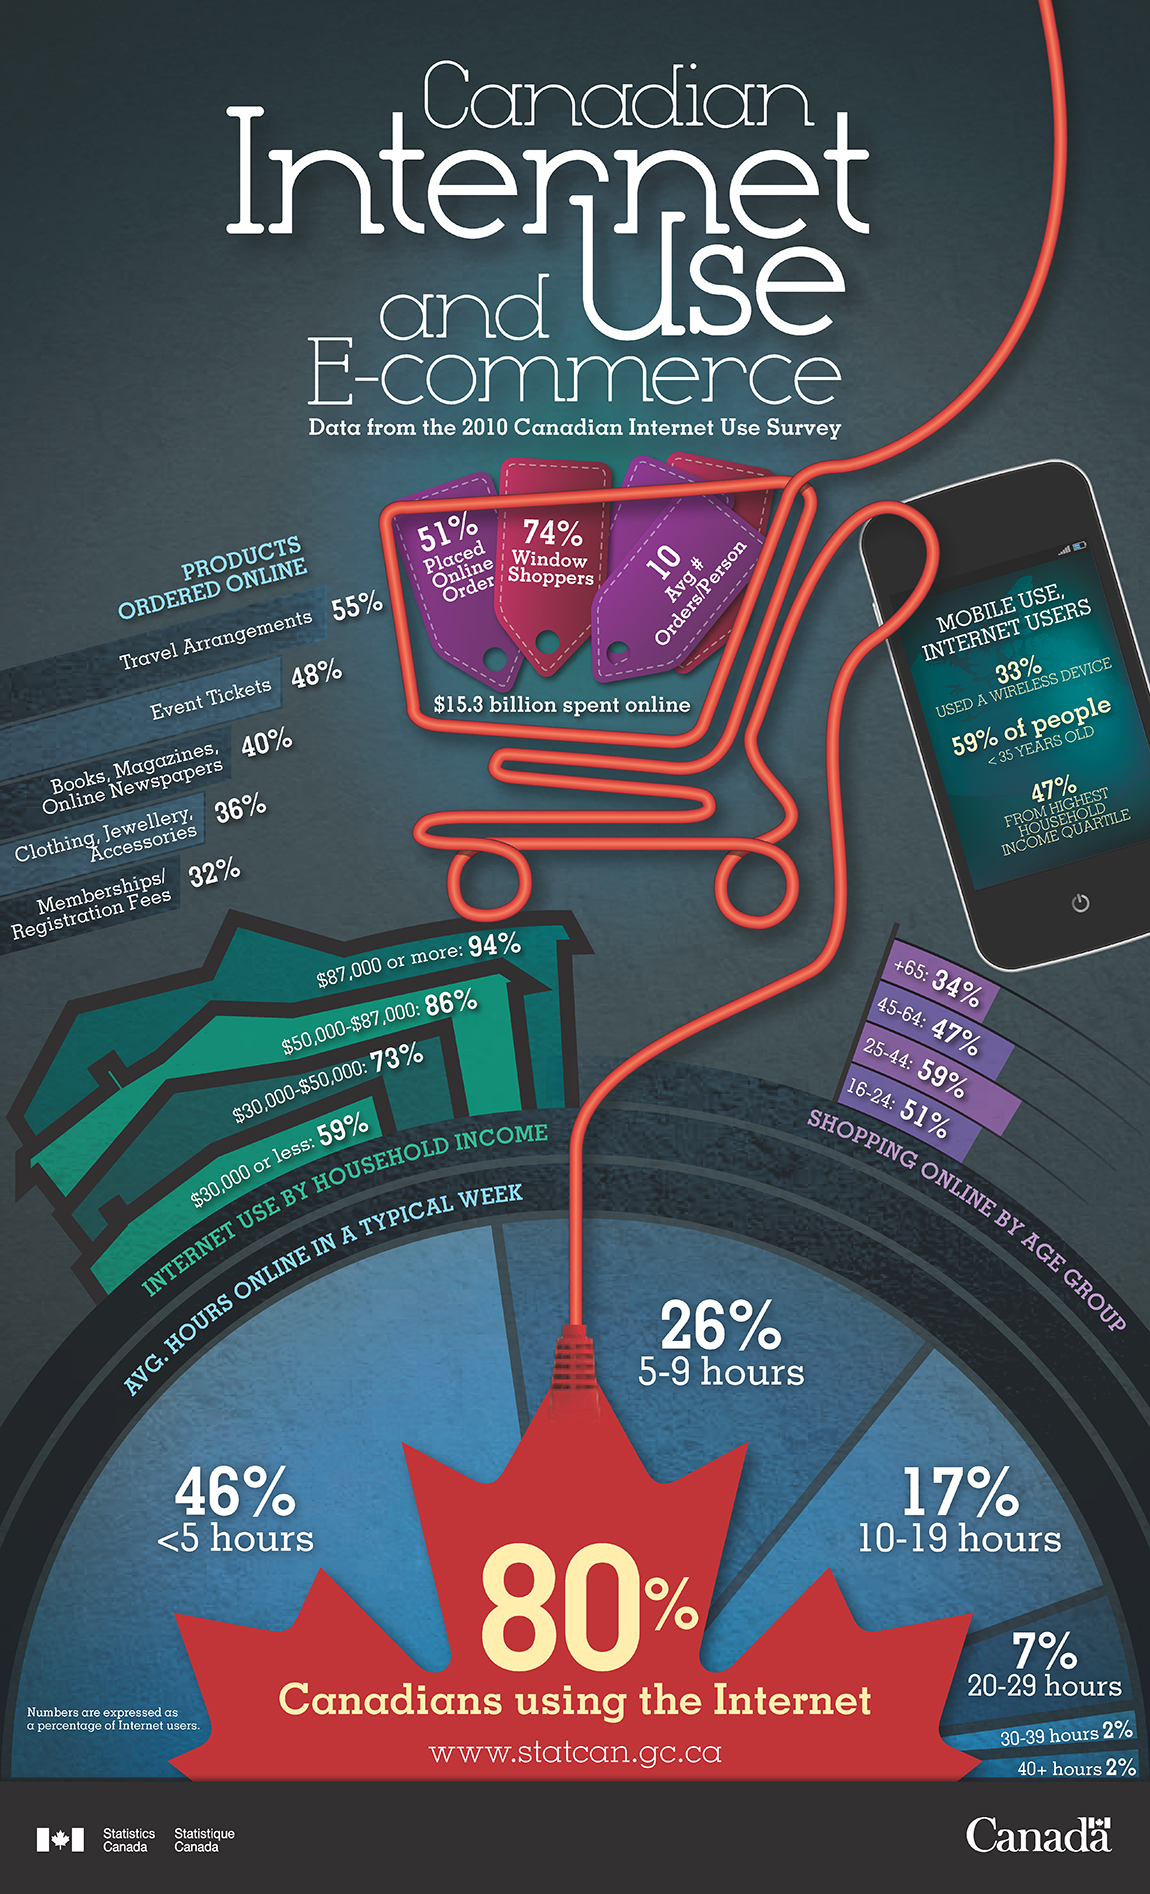 Infographic: Canadian Internet Use and e-Commerce – Data from the 2010 Internet User Survey